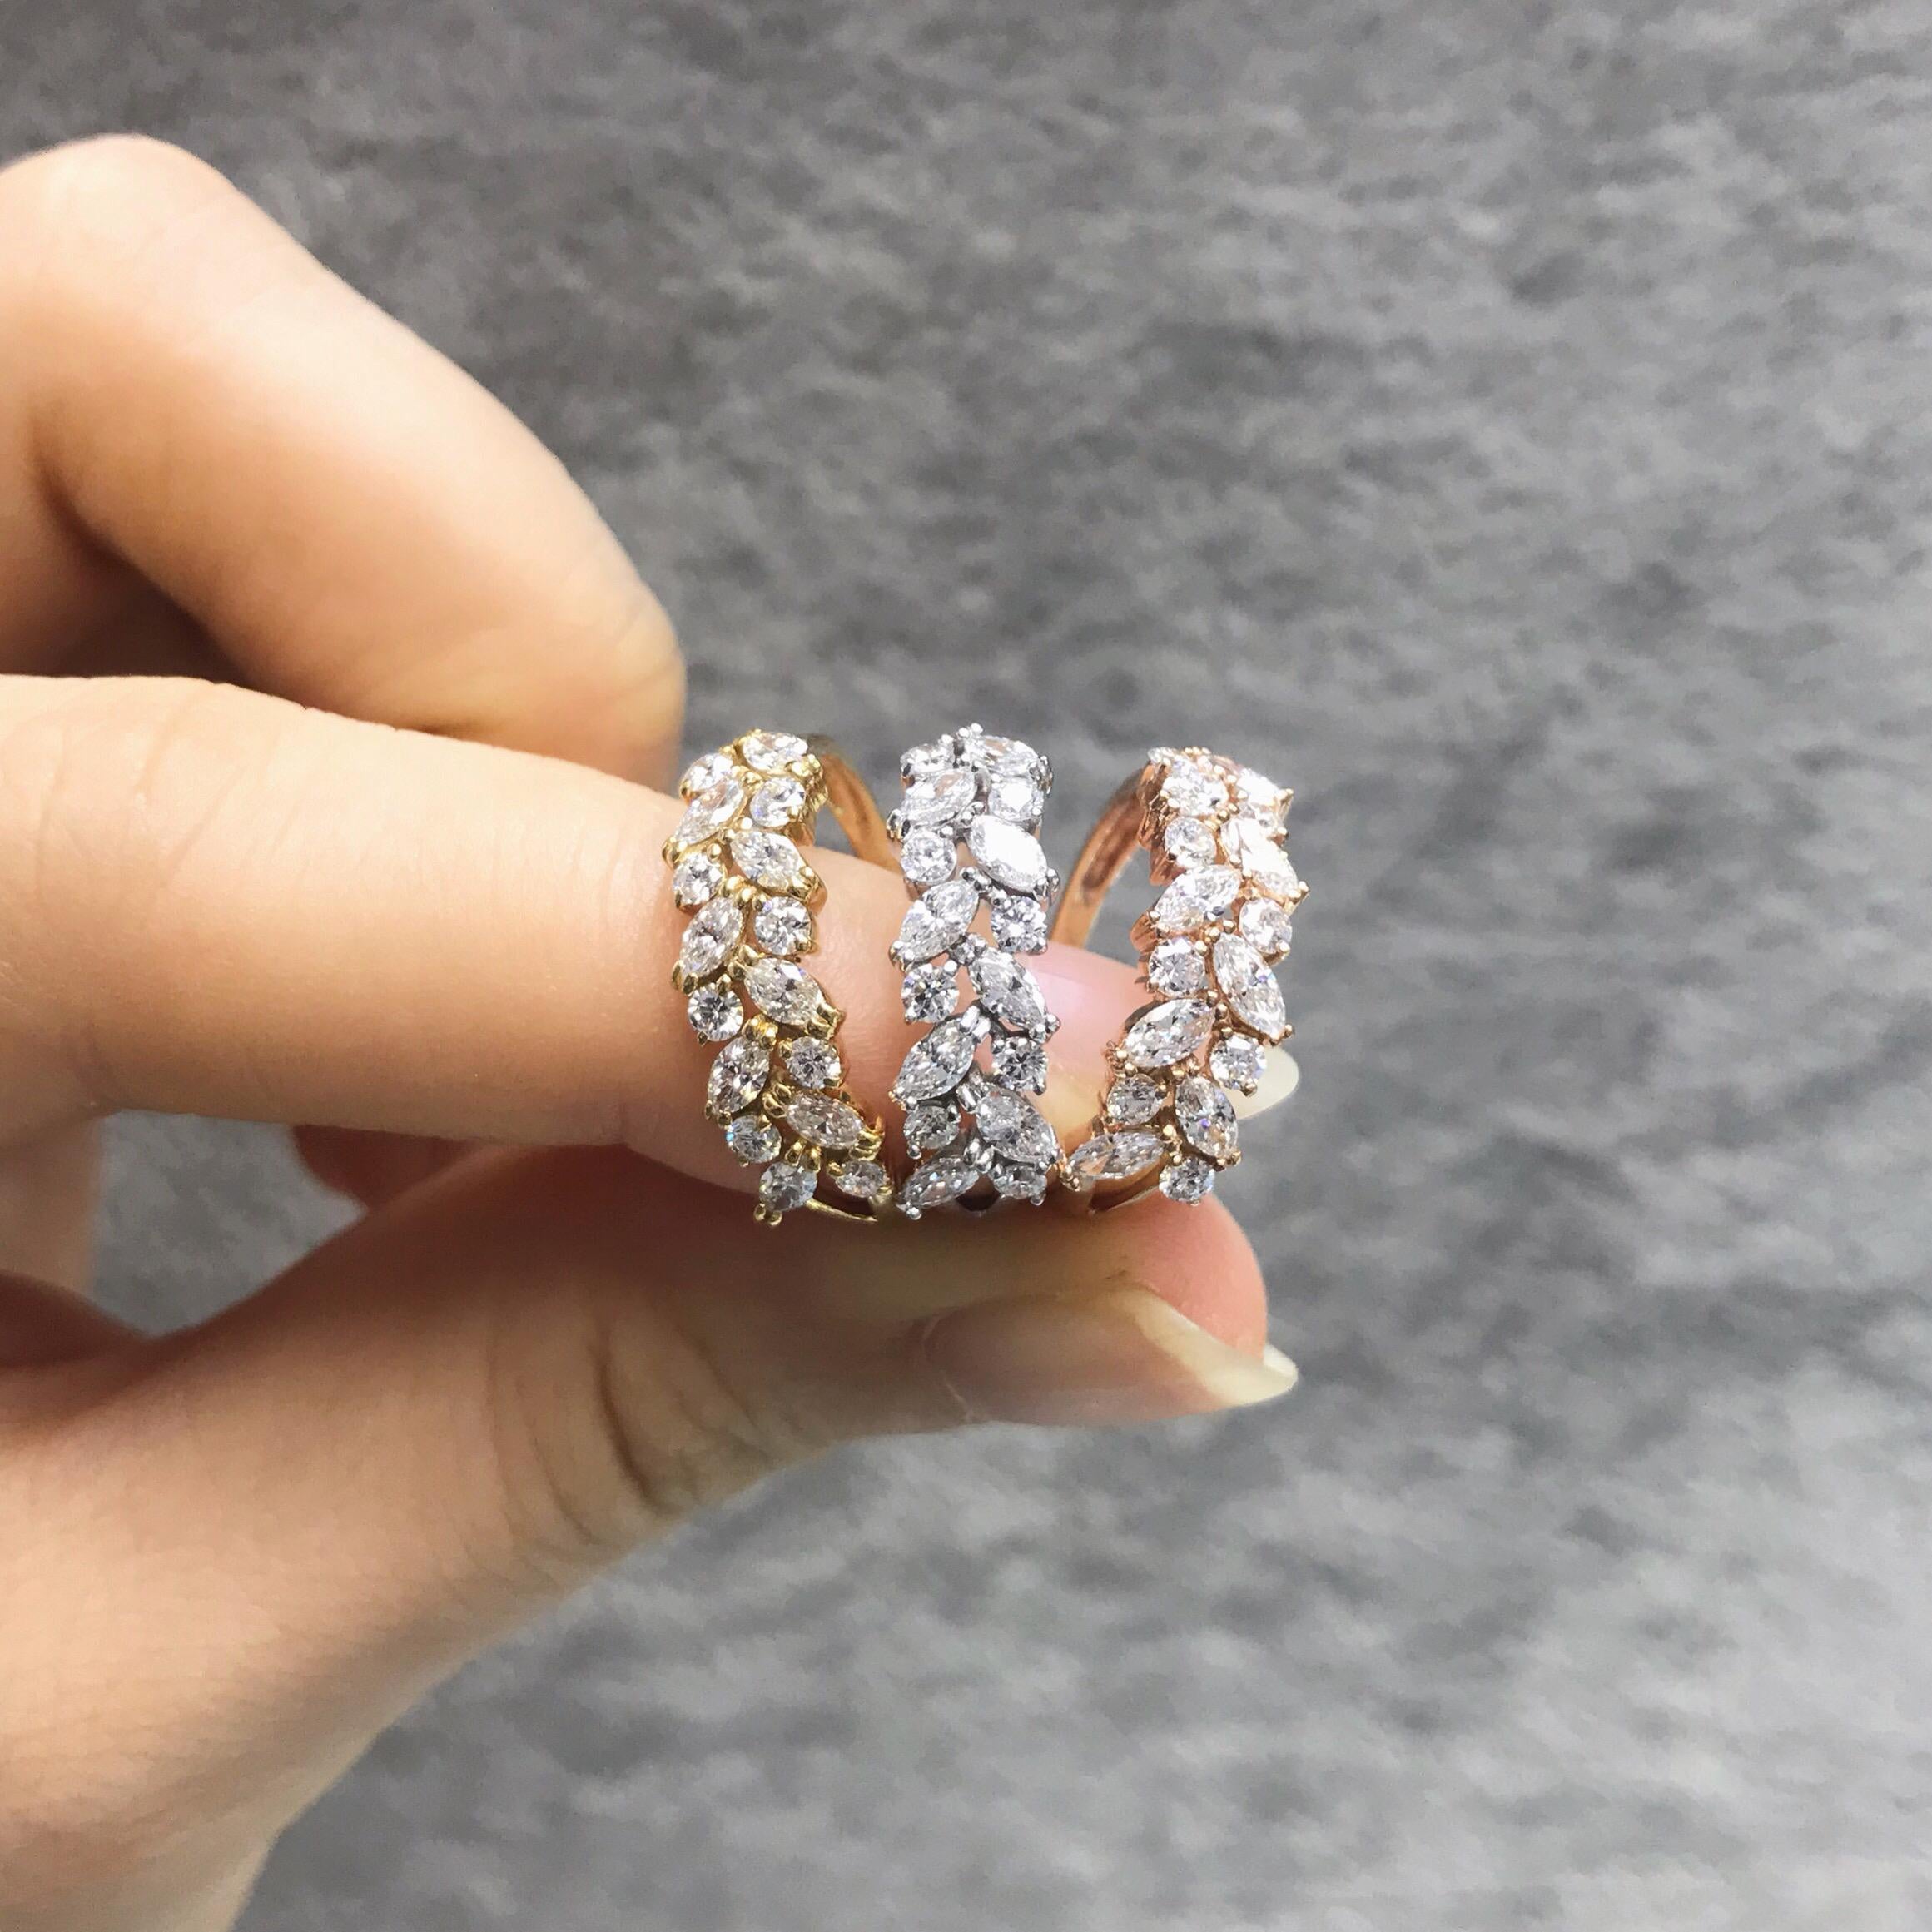 For Sale:  Unique Marquise Diamond Ring in 18k rose gold 9